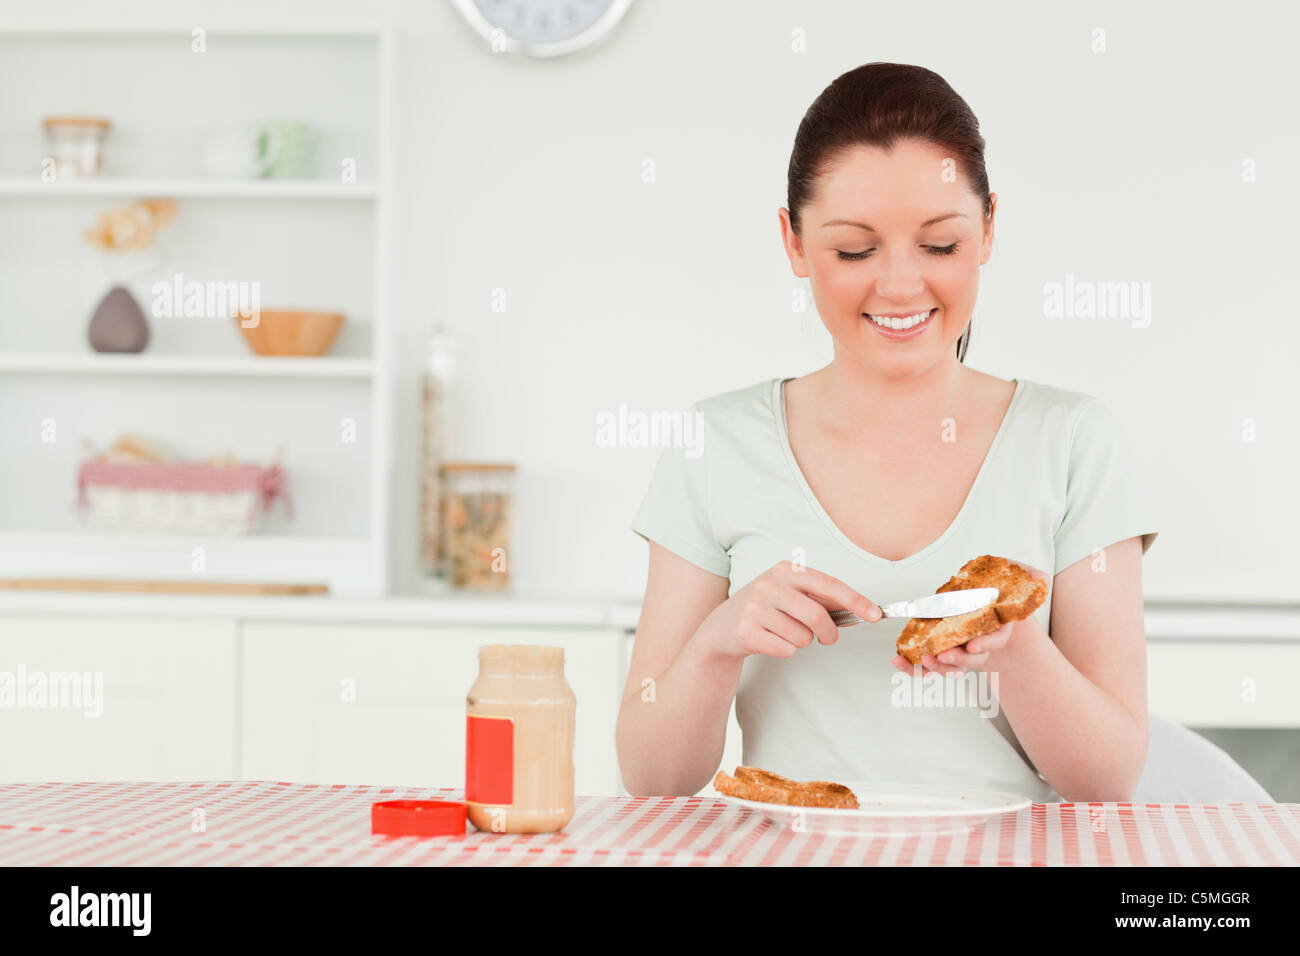 Good looking woman preparing a slice of bread and marmalade Stock Photo